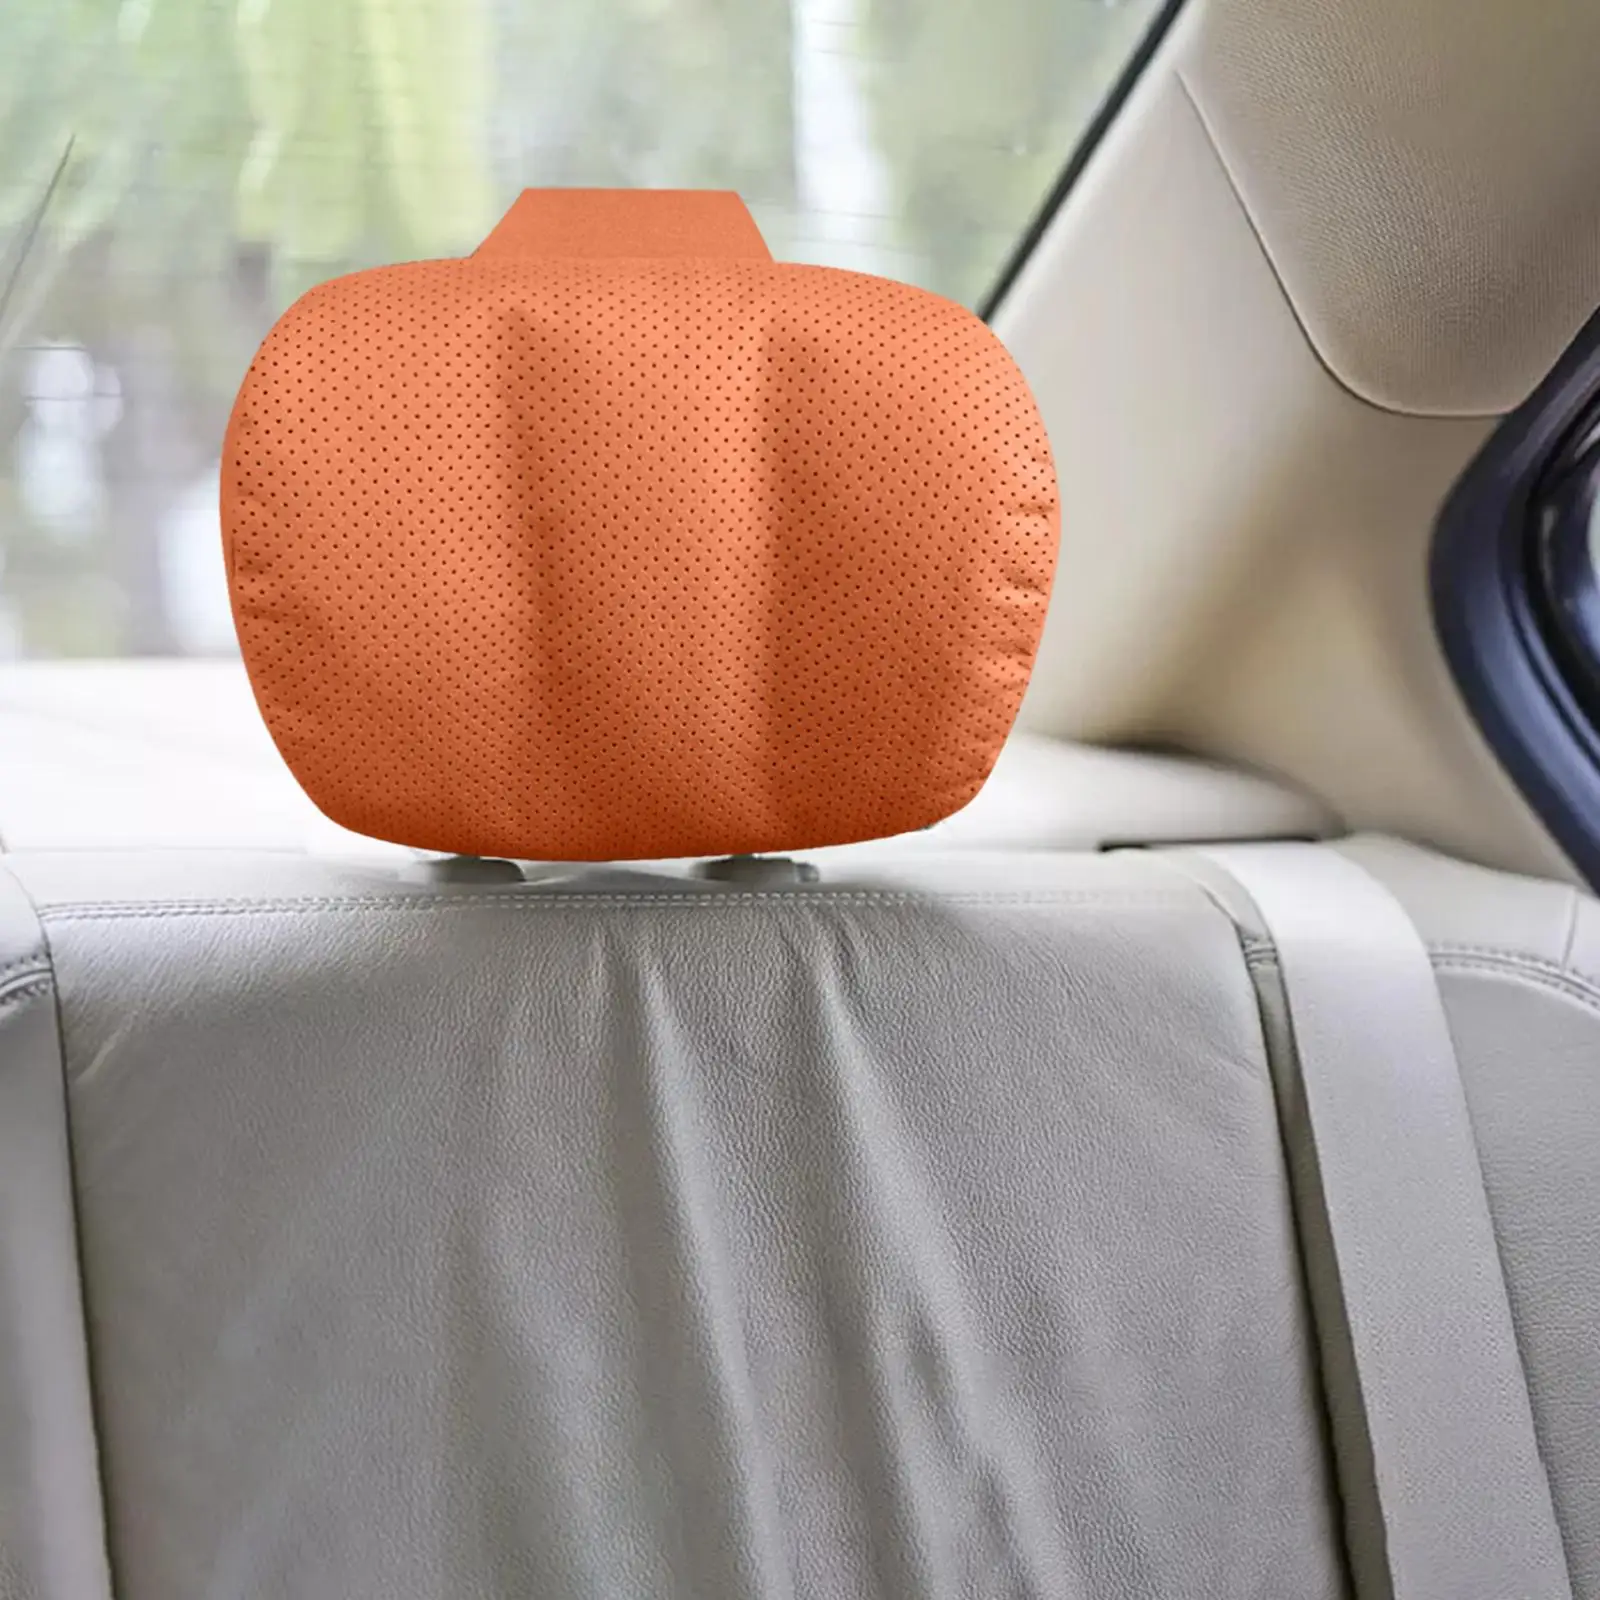 Automotive Neck Support Portable Soft Auto Headrest Breathable Premium Car Neck Pillow for Travel Driving Seat Home Office